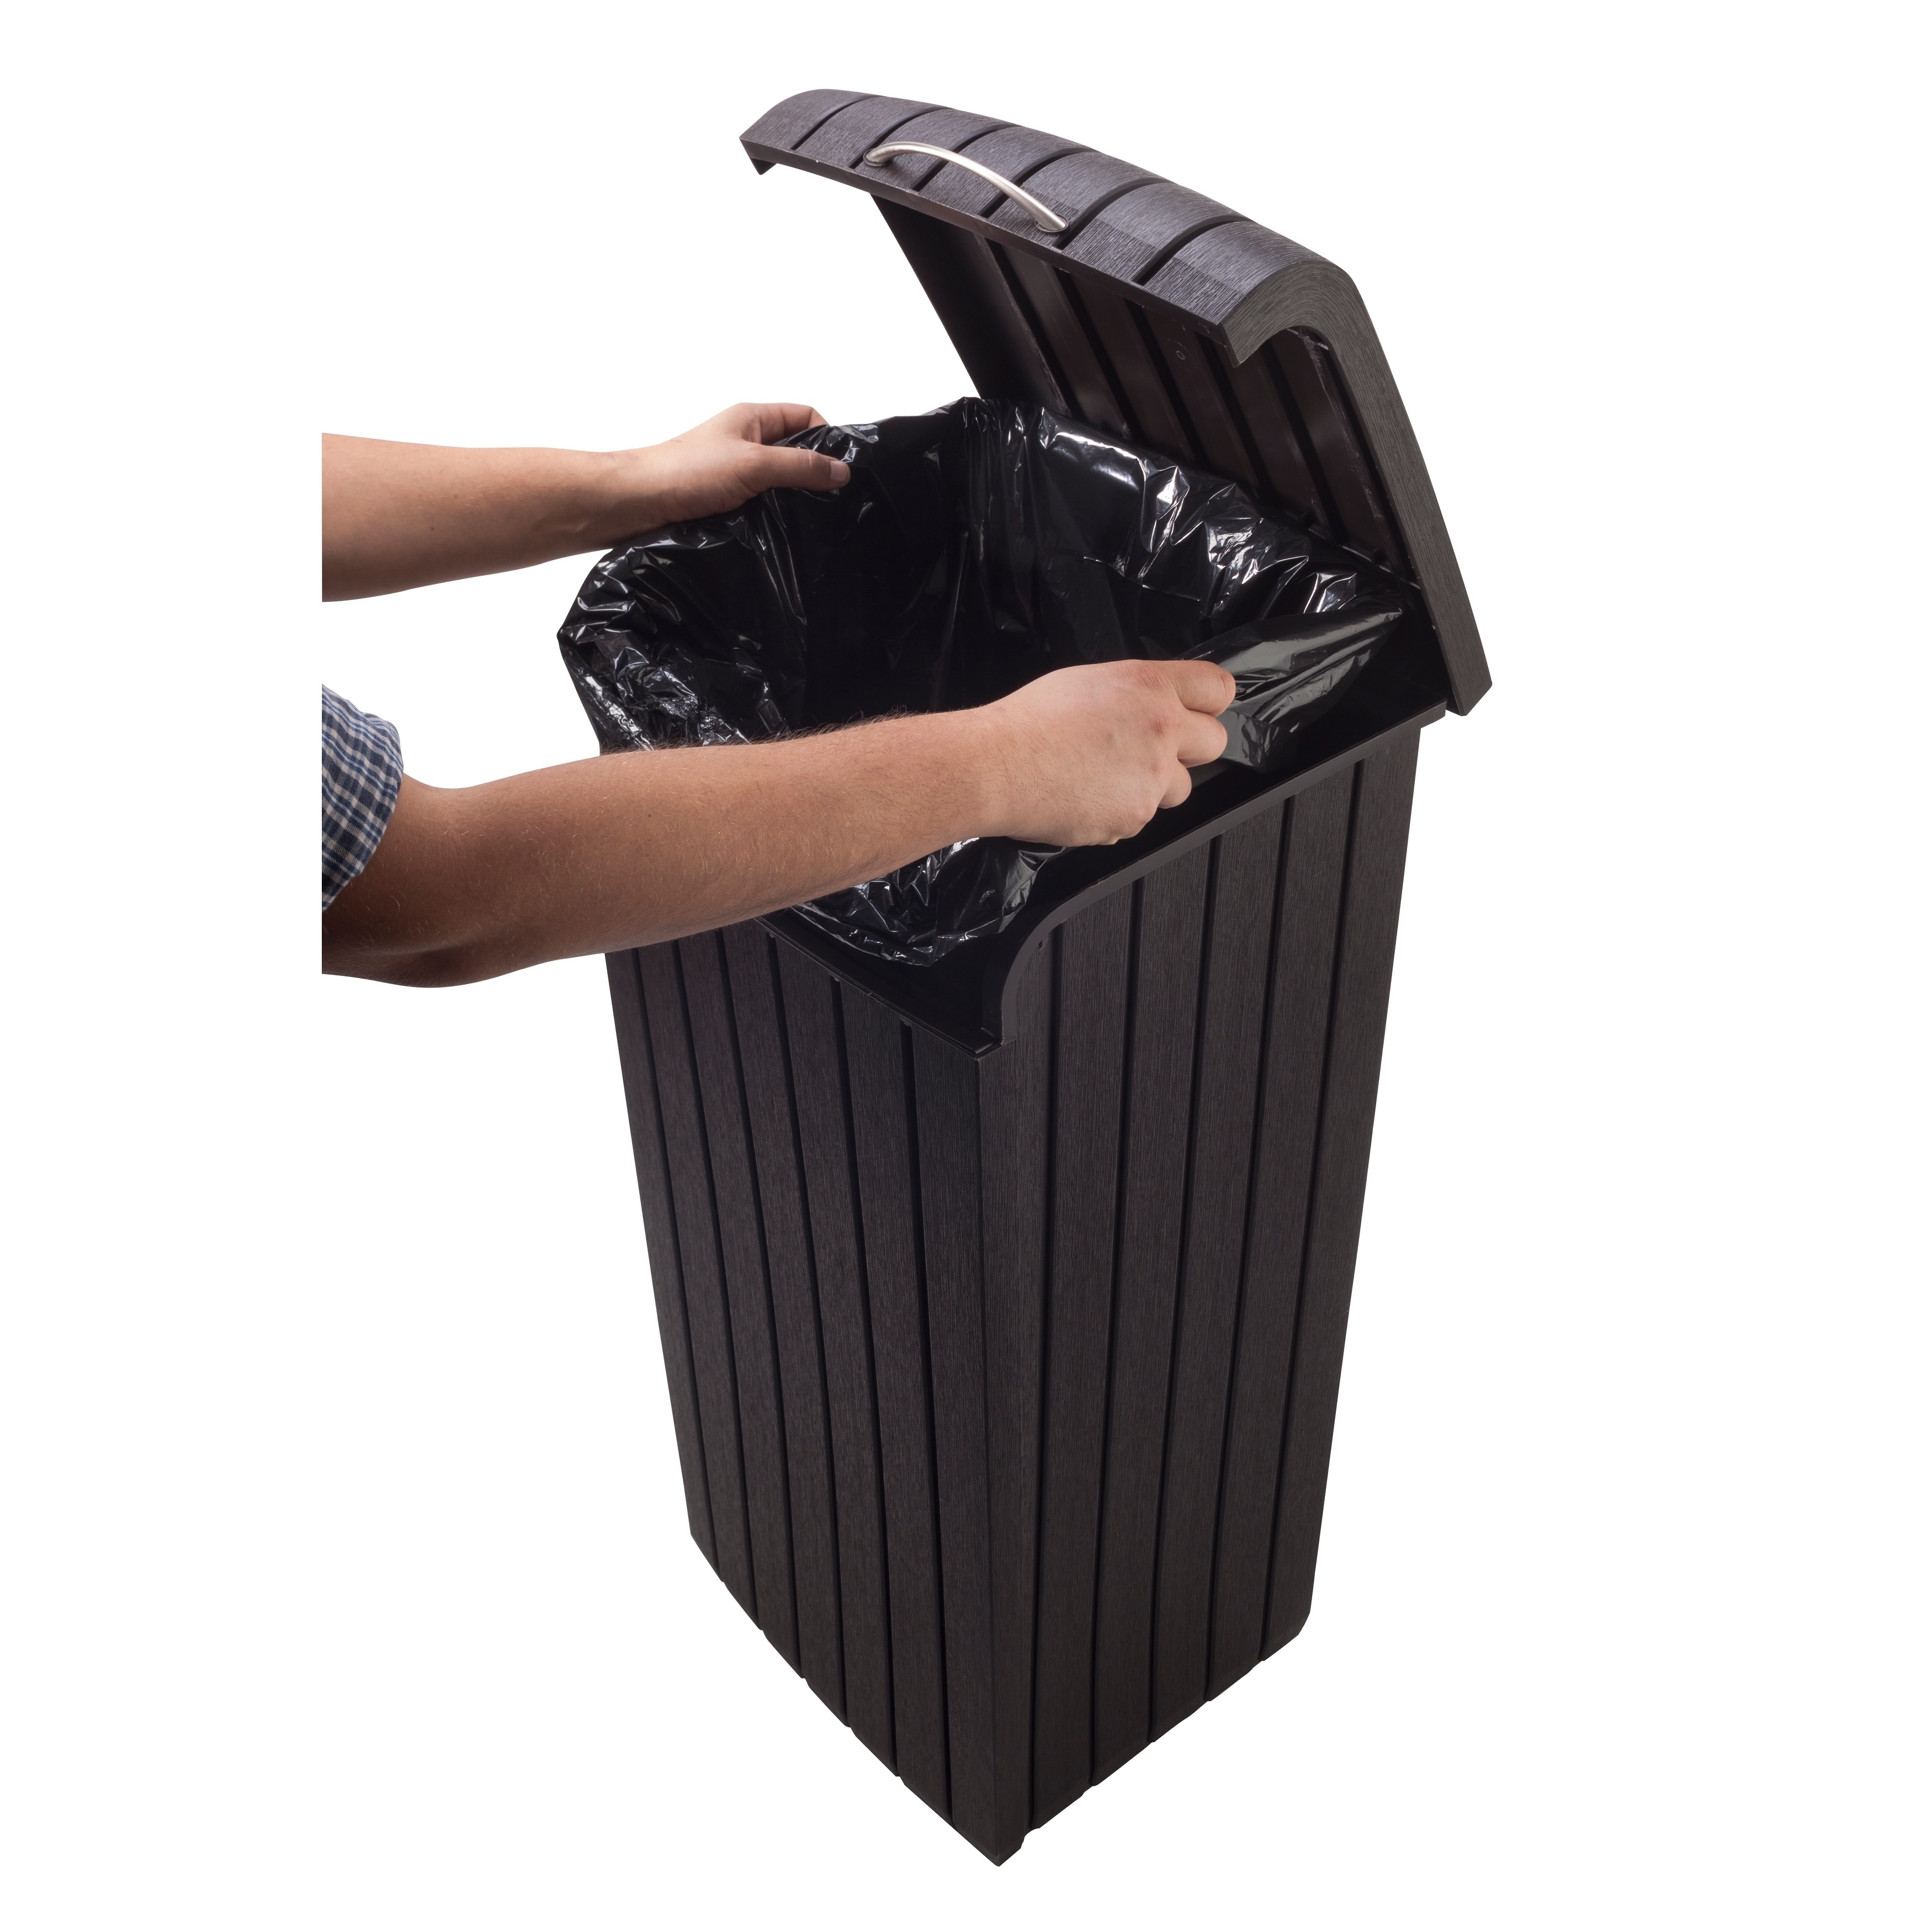  Outdoor trash can Outdoor/Indoor Trash Can Outdoor Steel Trash  Can Creative Round Outdoor Trash Bin Mushroom Shape Courtyard Trash Can  Metal Classification Trash Can Outdoor Garbage Can Large Outdoor : Home